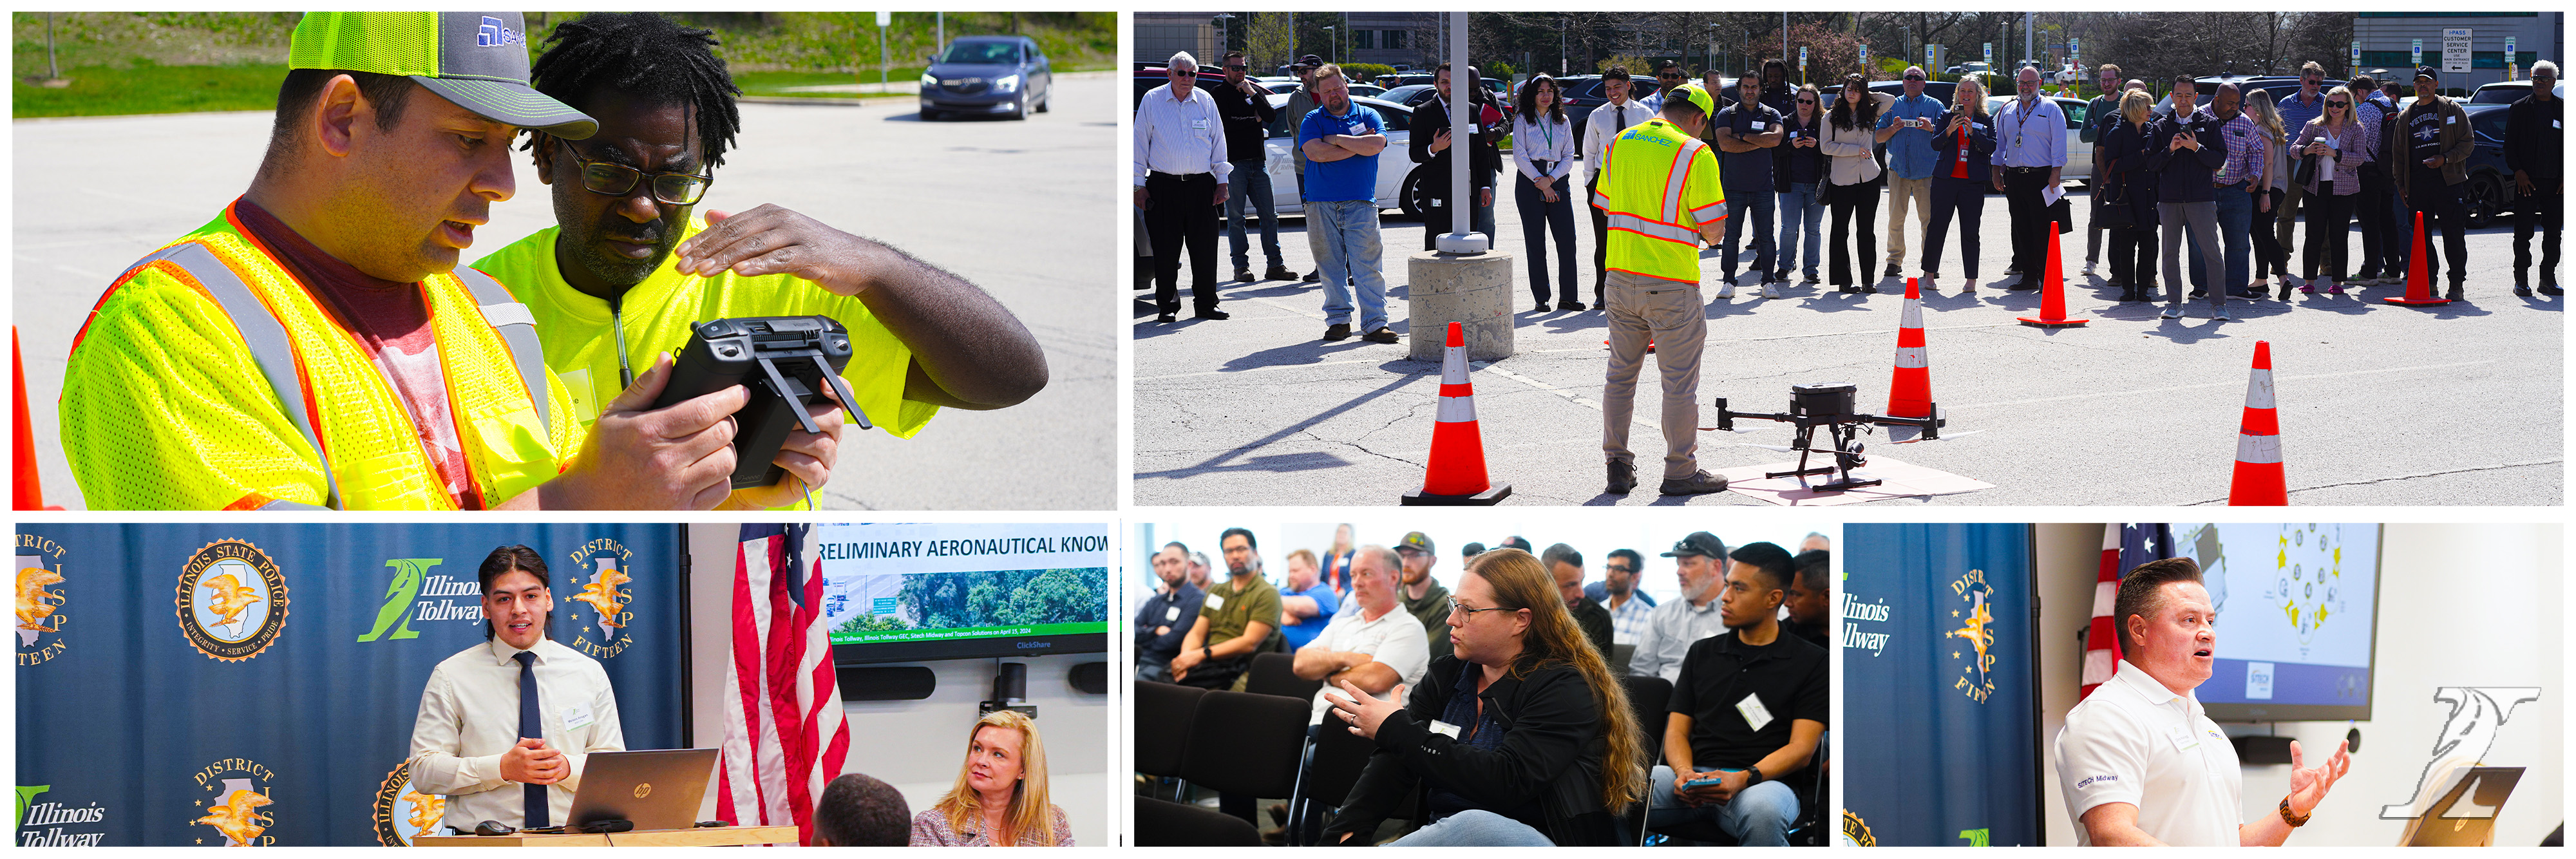 Illinois Tollway Helps Small and Diverse Businesses Reach New Heights With Drone Training Workshop